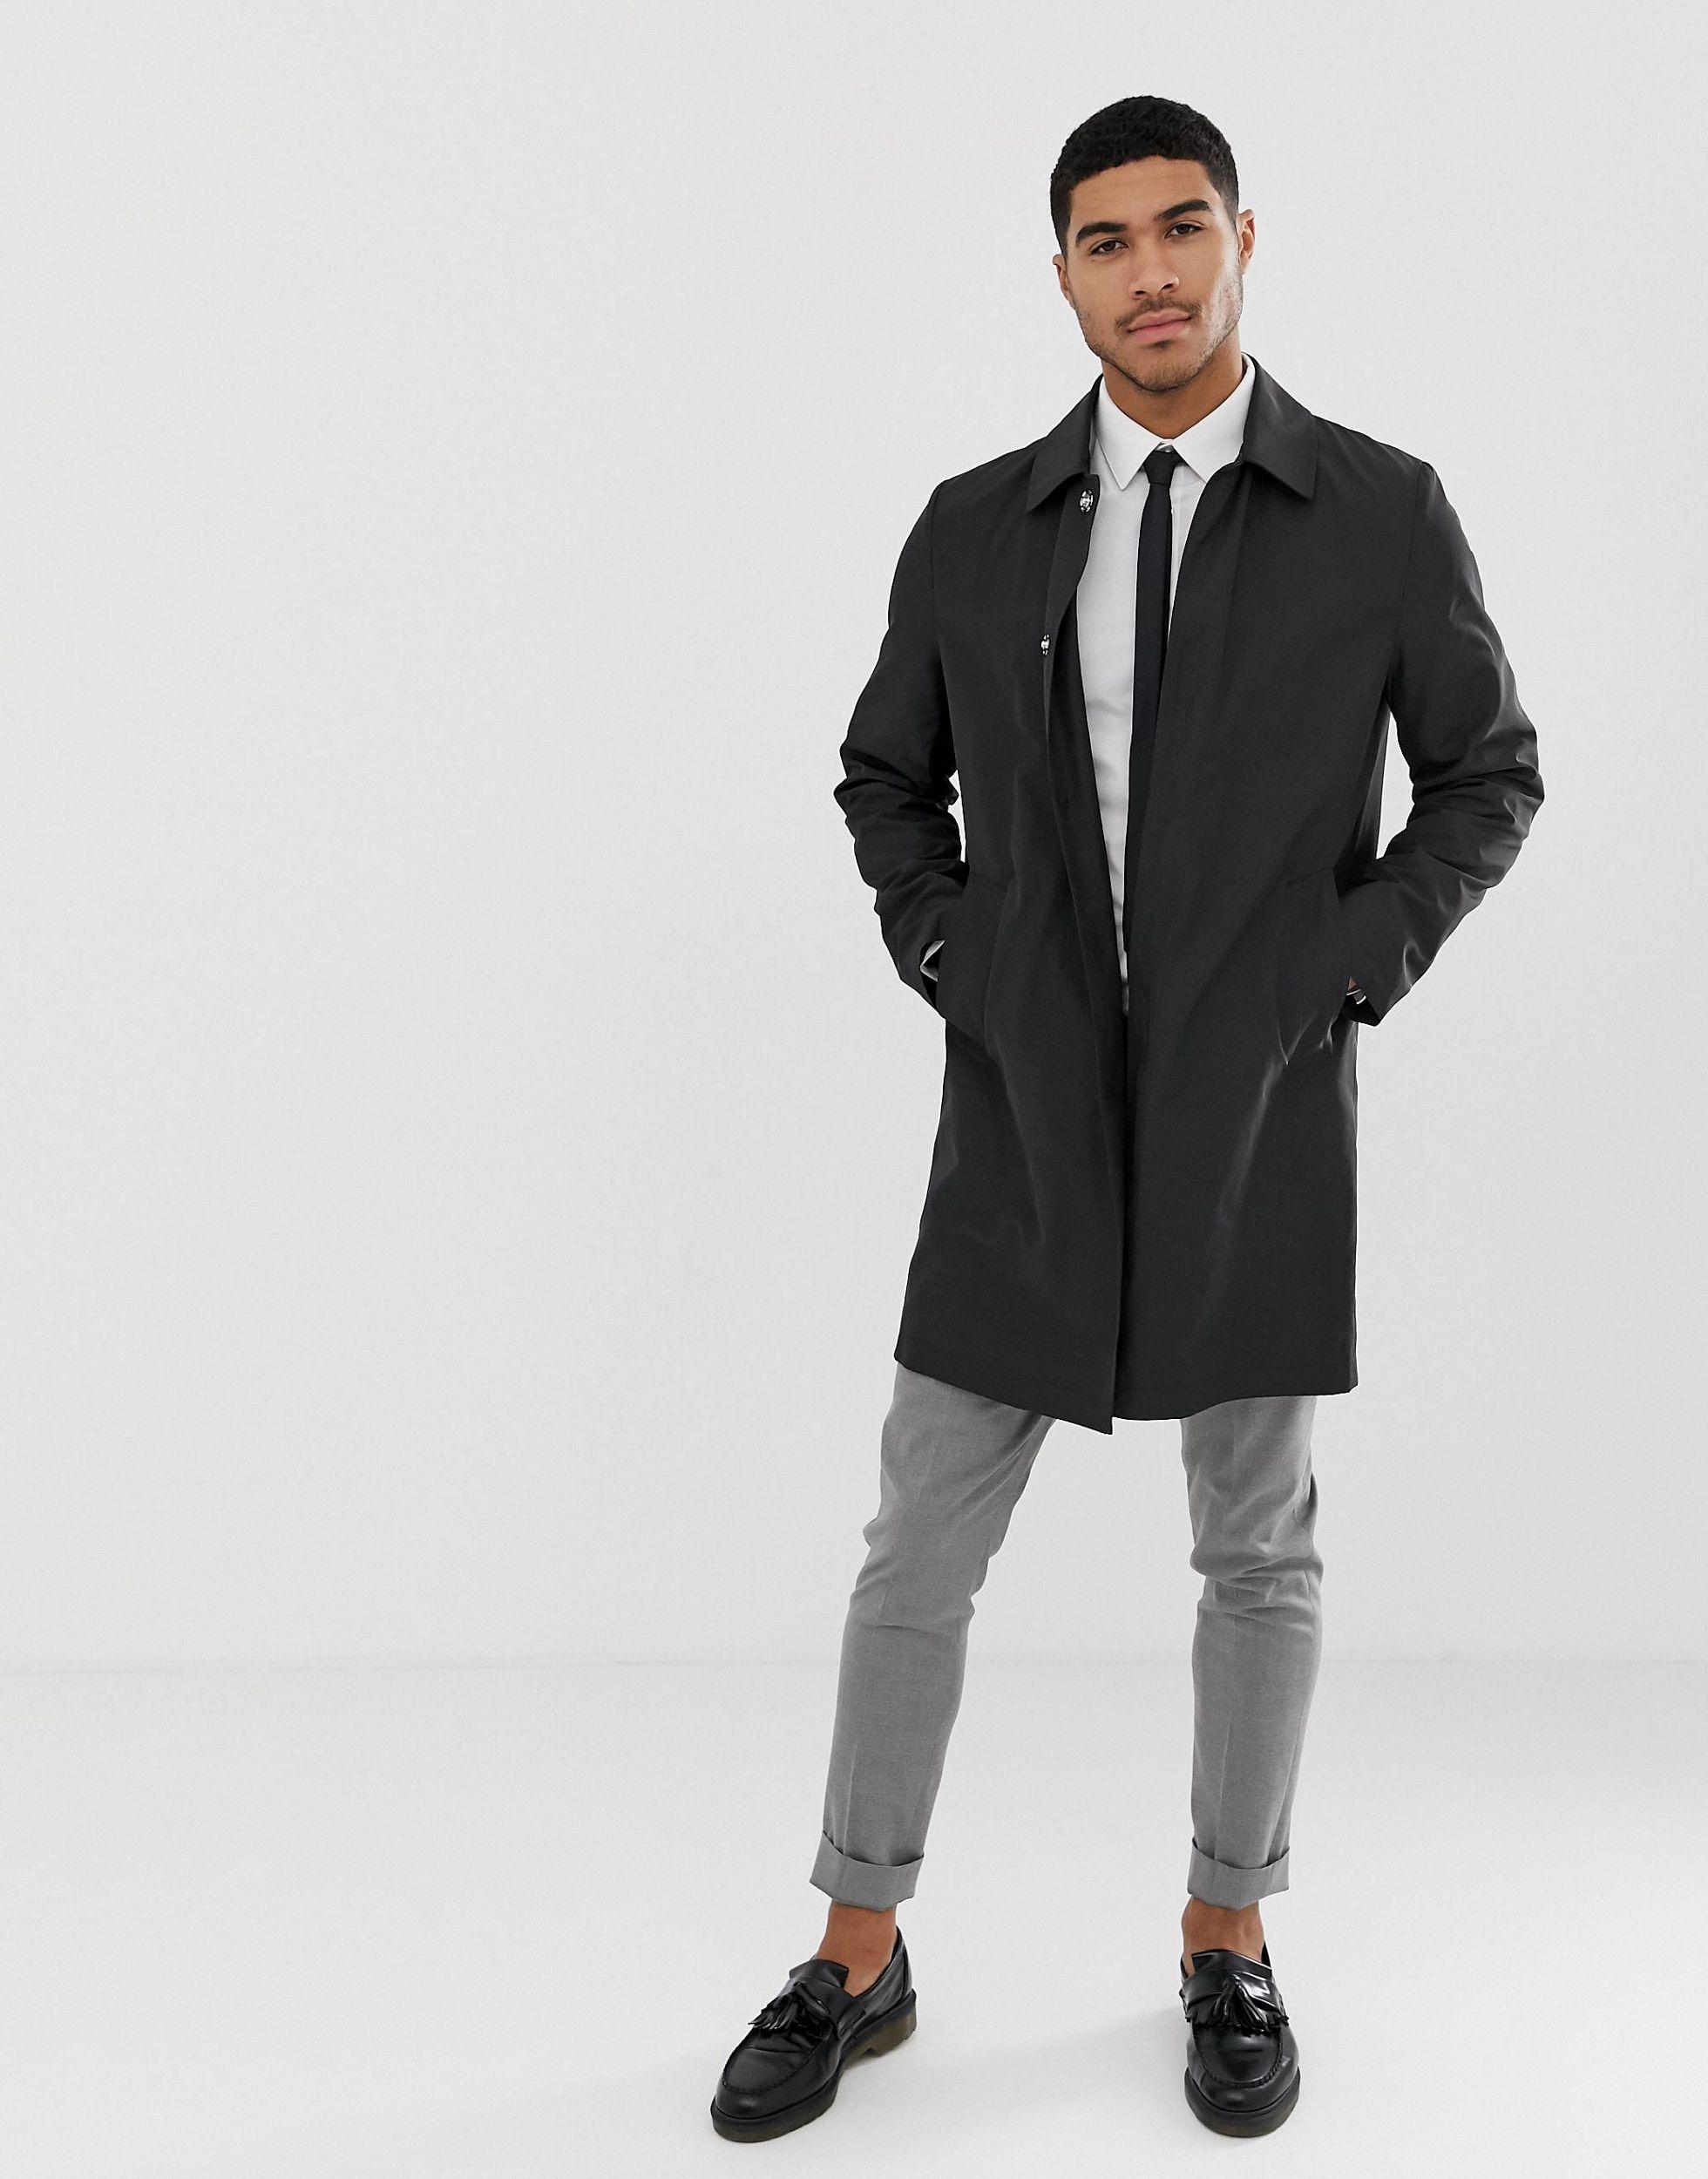 ASOS Synthetic Shower Resistant Trench Coat in Black for Men - Lyst